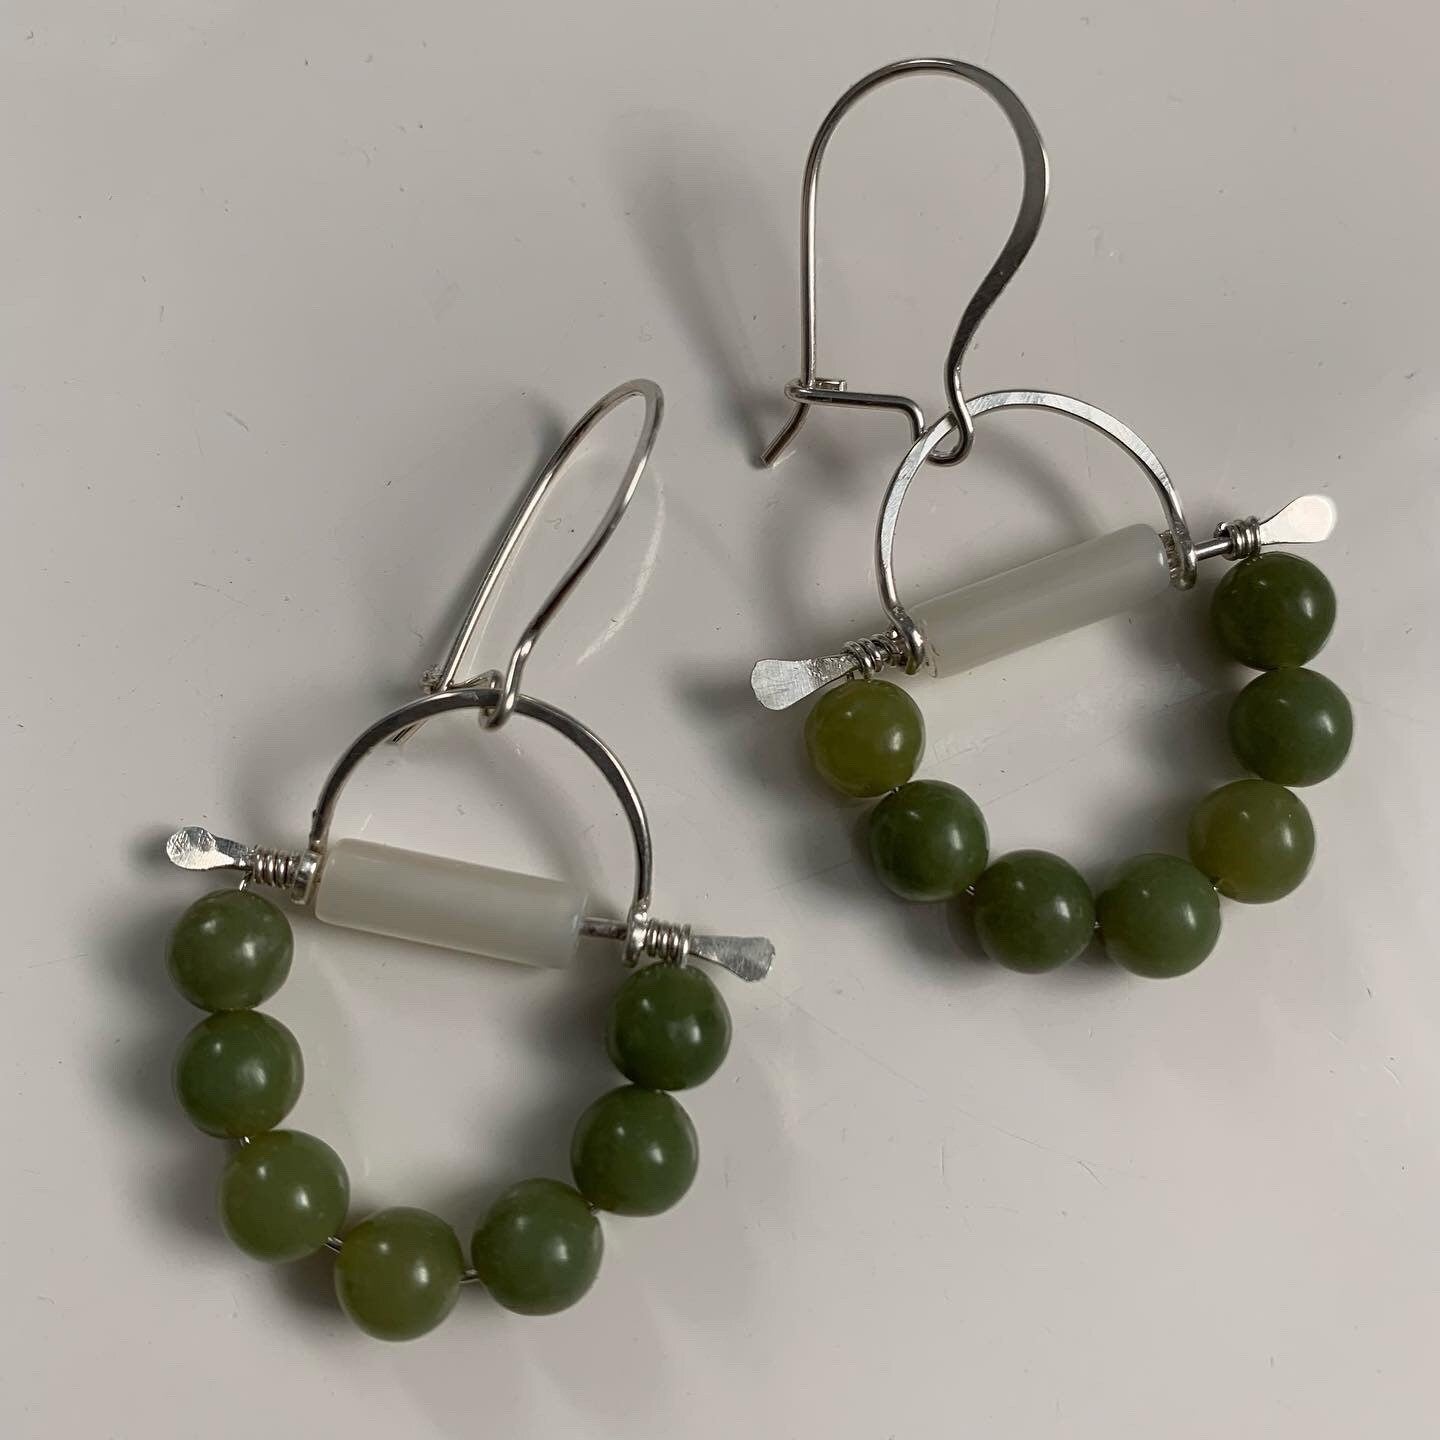 Earrings with jade beads and mother of - small, handmade statement earrings - rustic jewelry for her - beaded jewelry - yoga - boho chic